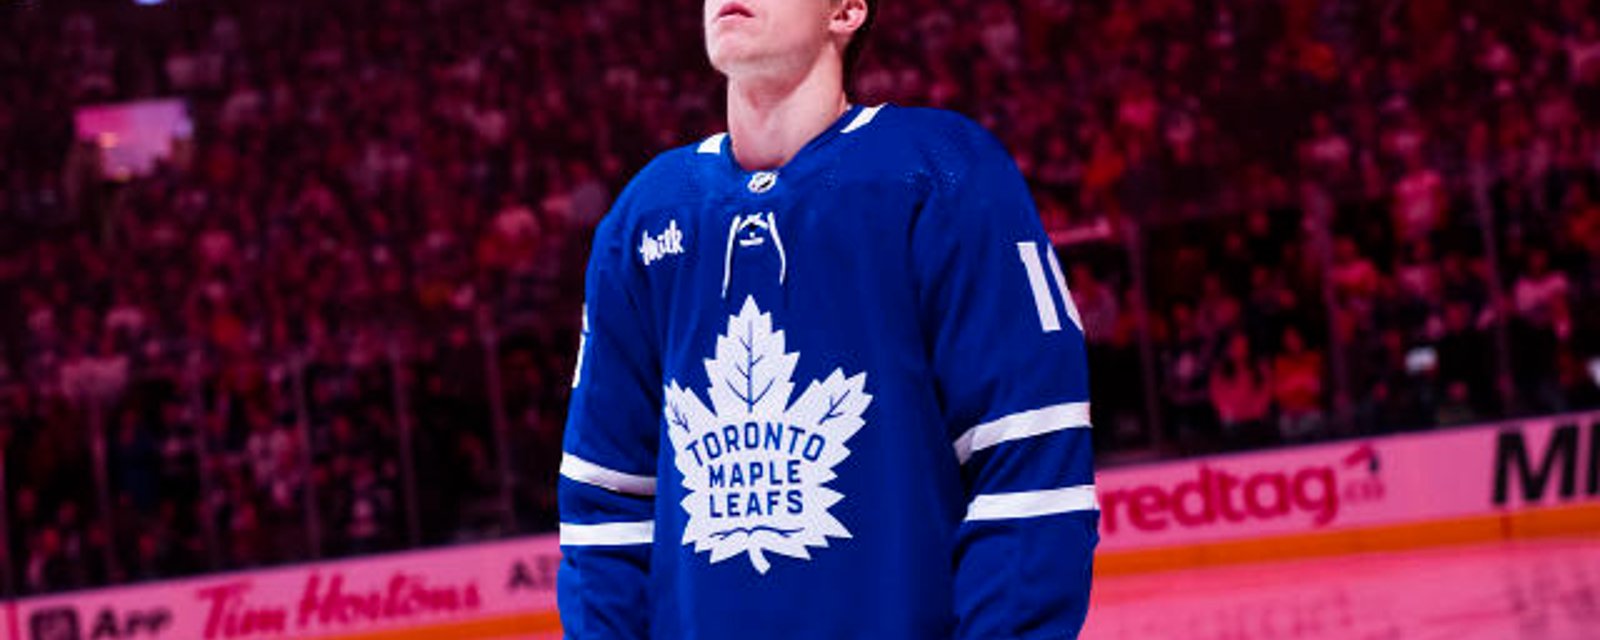 Key details on Mitch Marner's future with Leafs leaked 